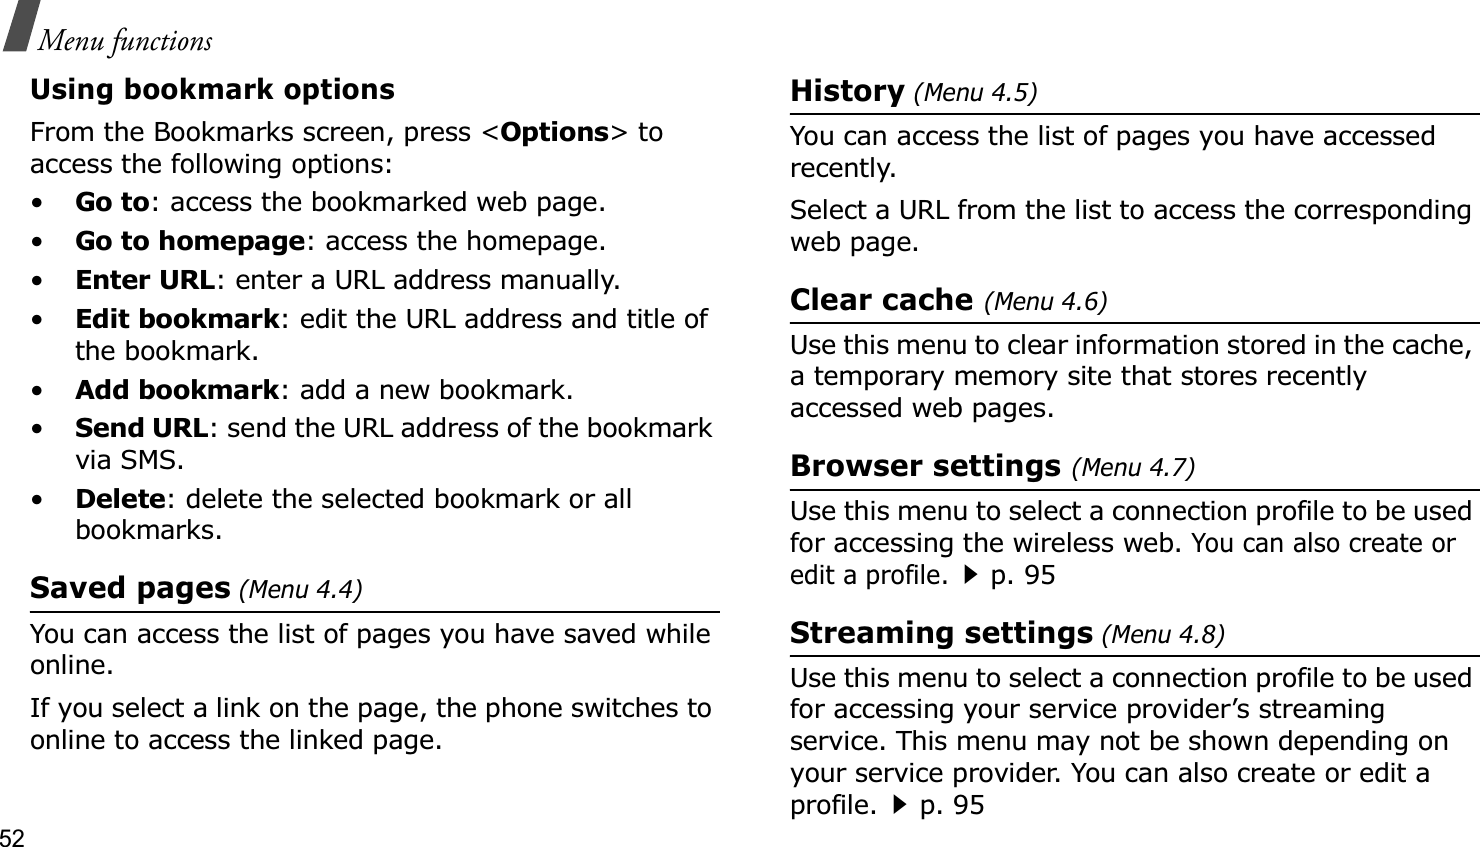 52Menu functionsUsing bookmark optionsFrom the Bookmarks screen, press &lt;Options&gt; to access the following options:•Go to: access the bookmarked web page.•Go to homepage: access the homepage.•Enter URL: enter a URL address manually.•Edit bookmark: edit the URL address and title of the bookmark.•Add bookmark: add a new bookmark.•Send URL: send the URL address of the bookmark via SMS.•Delete: delete the selected bookmark or all bookmarks.Saved pages (Menu 4.4)You can access the list of pages you have saved while online. If you select a link on the page, the phone switches to online to access the linked page.History (Menu 4.5)You can access the list of pages you have accessed recently.Select a URL from the list to access the corresponding web page. Clear cache (Menu 4.6)Use this menu to clear information stored in the cache, a temporary memory site that stores recently accessed web pages.Browser settings (Menu 4.7)Use this menu to select a connection profile to be used for accessing the wireless web. You can also create or edit a profile.p. 95Streaming settings (Menu 4.8)Use this menu to select a connection profile to be used for accessing your service provider’s streaming service. This menu may not be shown depending on your service provider. You can also create or edit a profile.p. 95